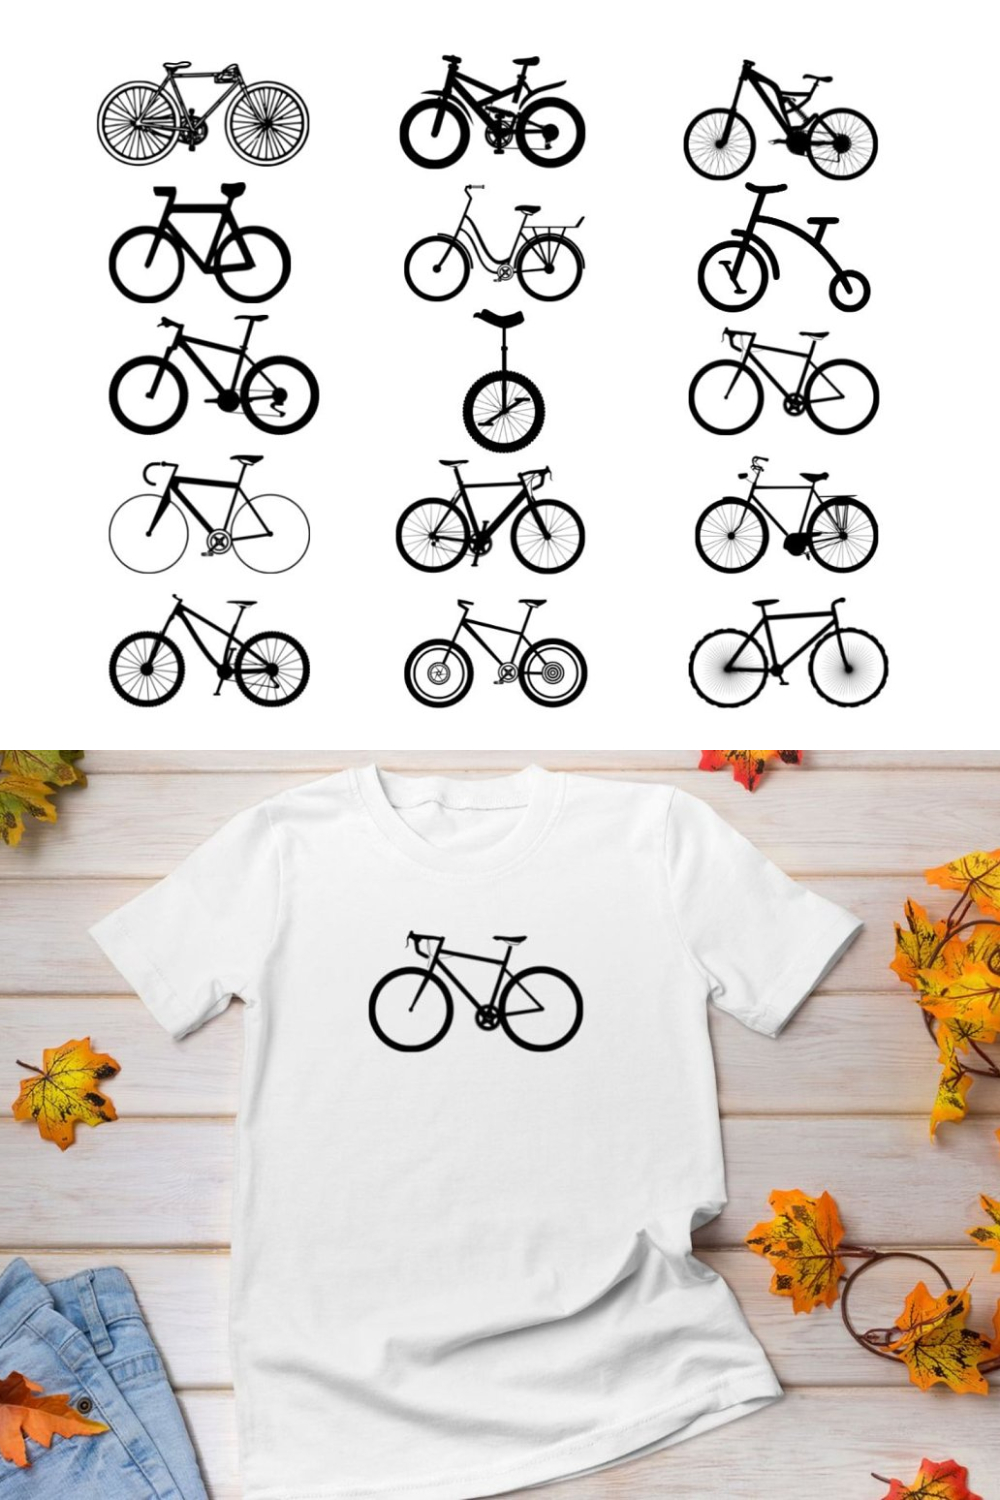 Bicycle Silhouette Vector - Pinterest.